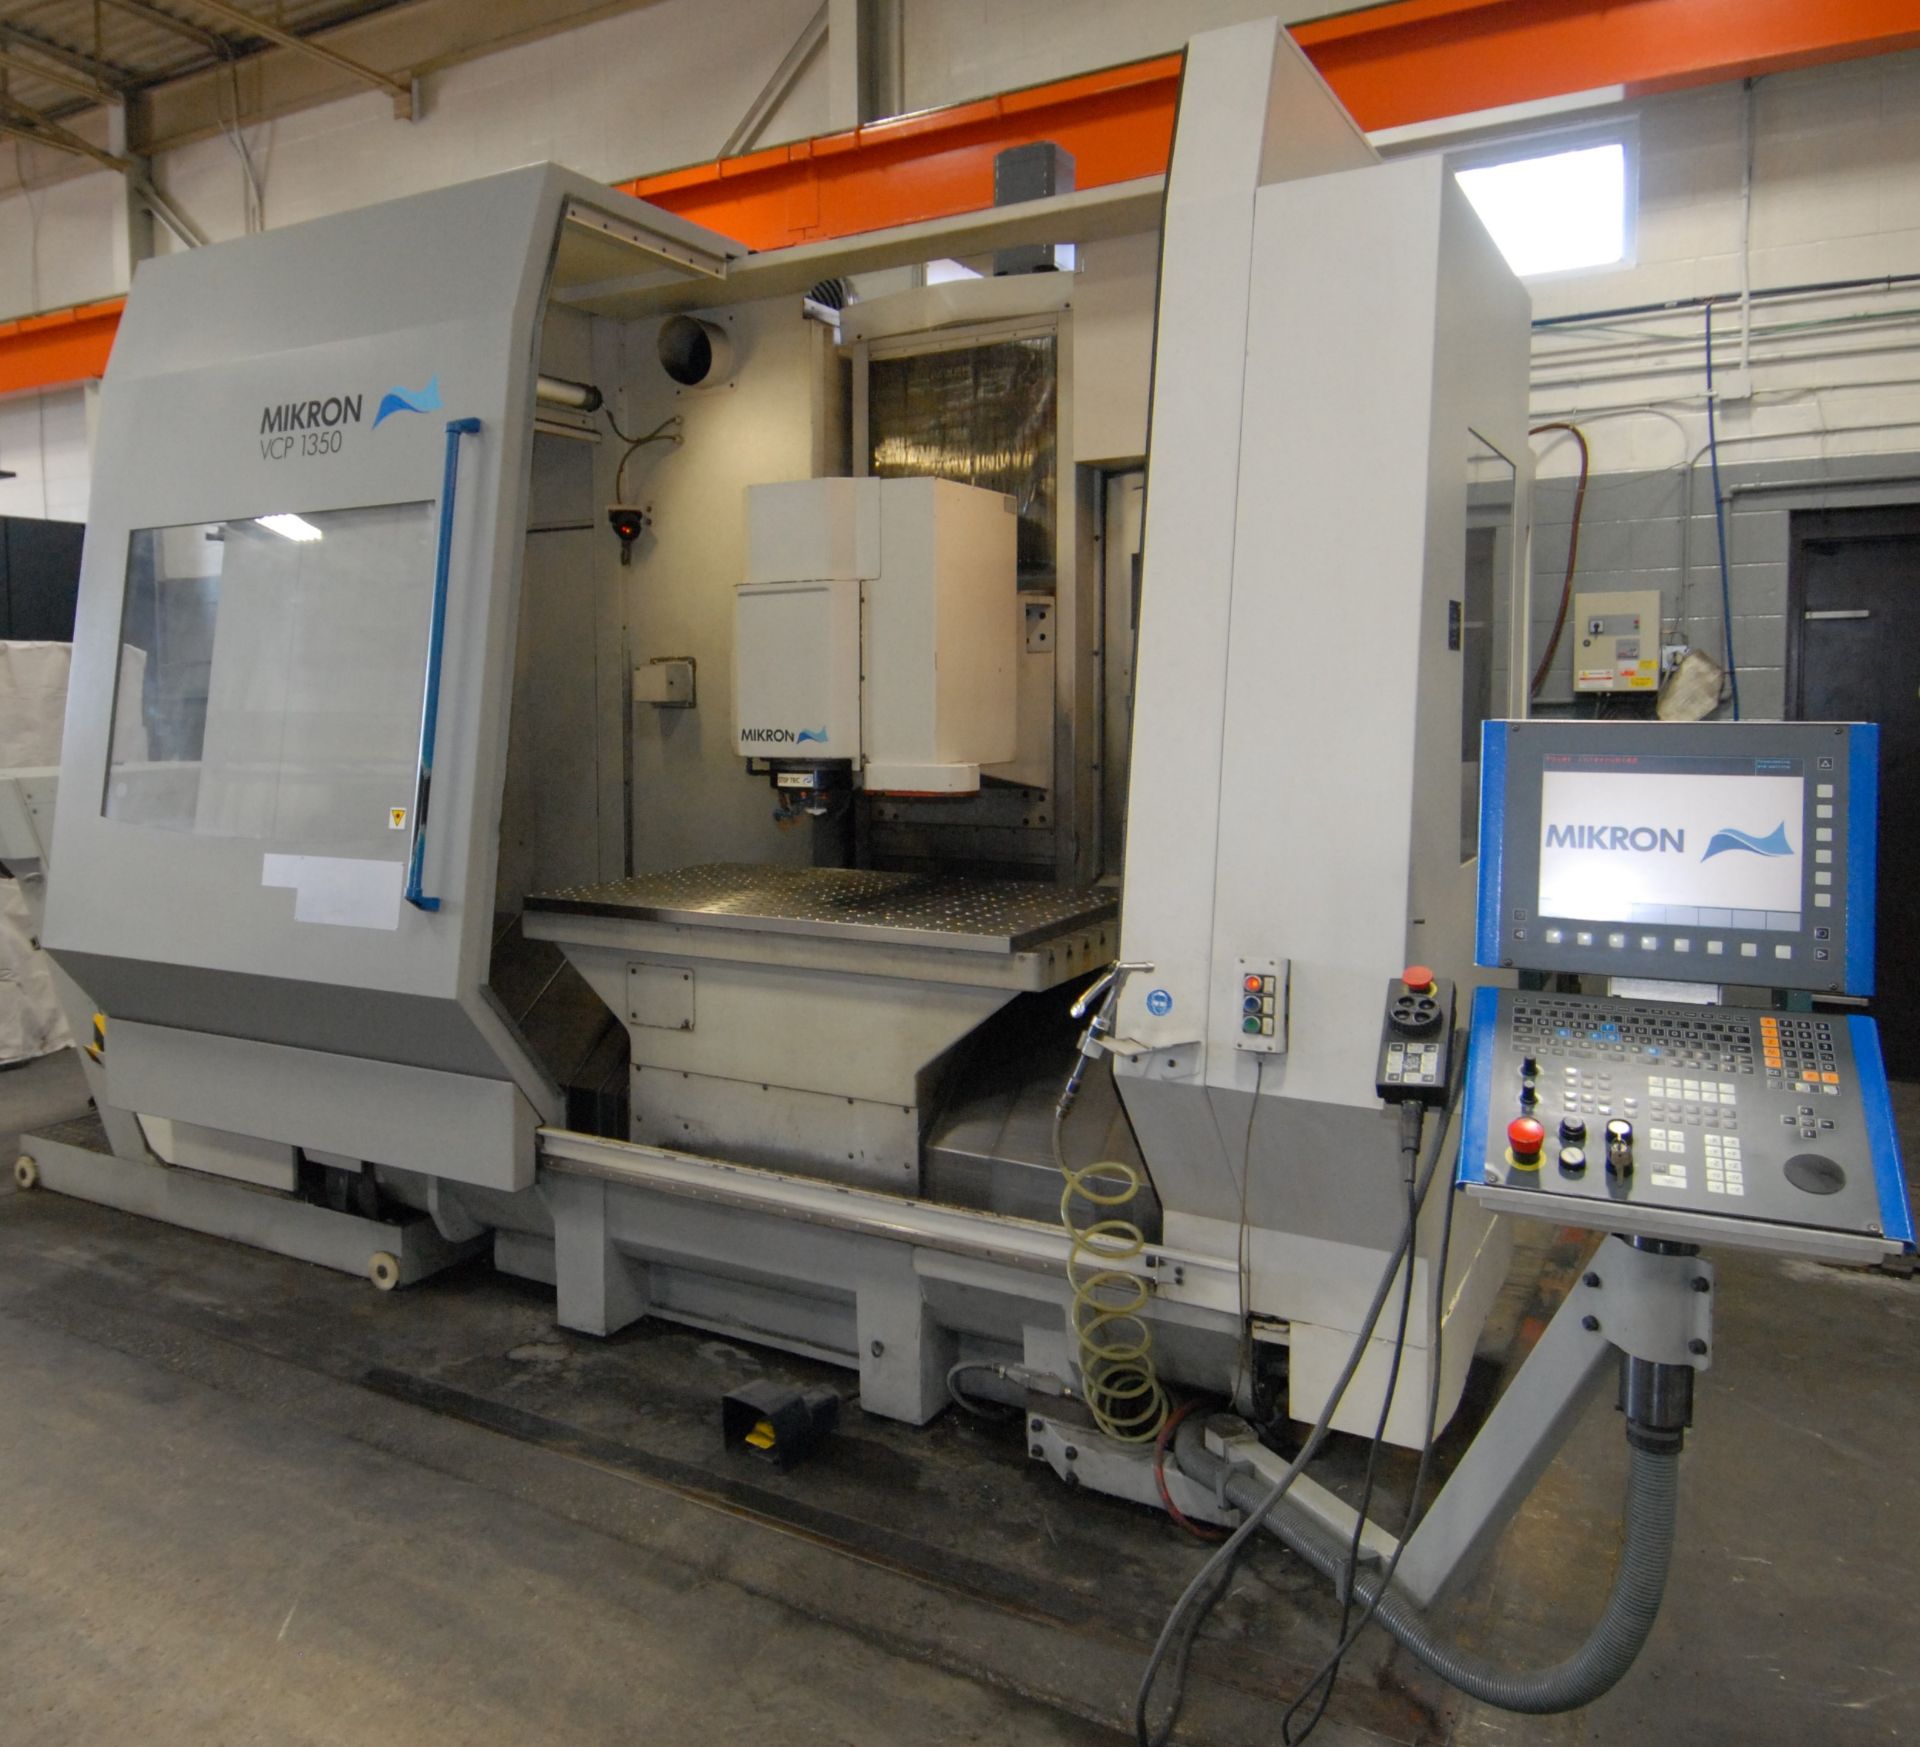 MIKRON (2003) VCP1350 HIGH SPEED CNC VERTICAL MACHINING CENTER WITH HEIDENHAIN ITNC CNC CONTROL, - Image 7 of 7